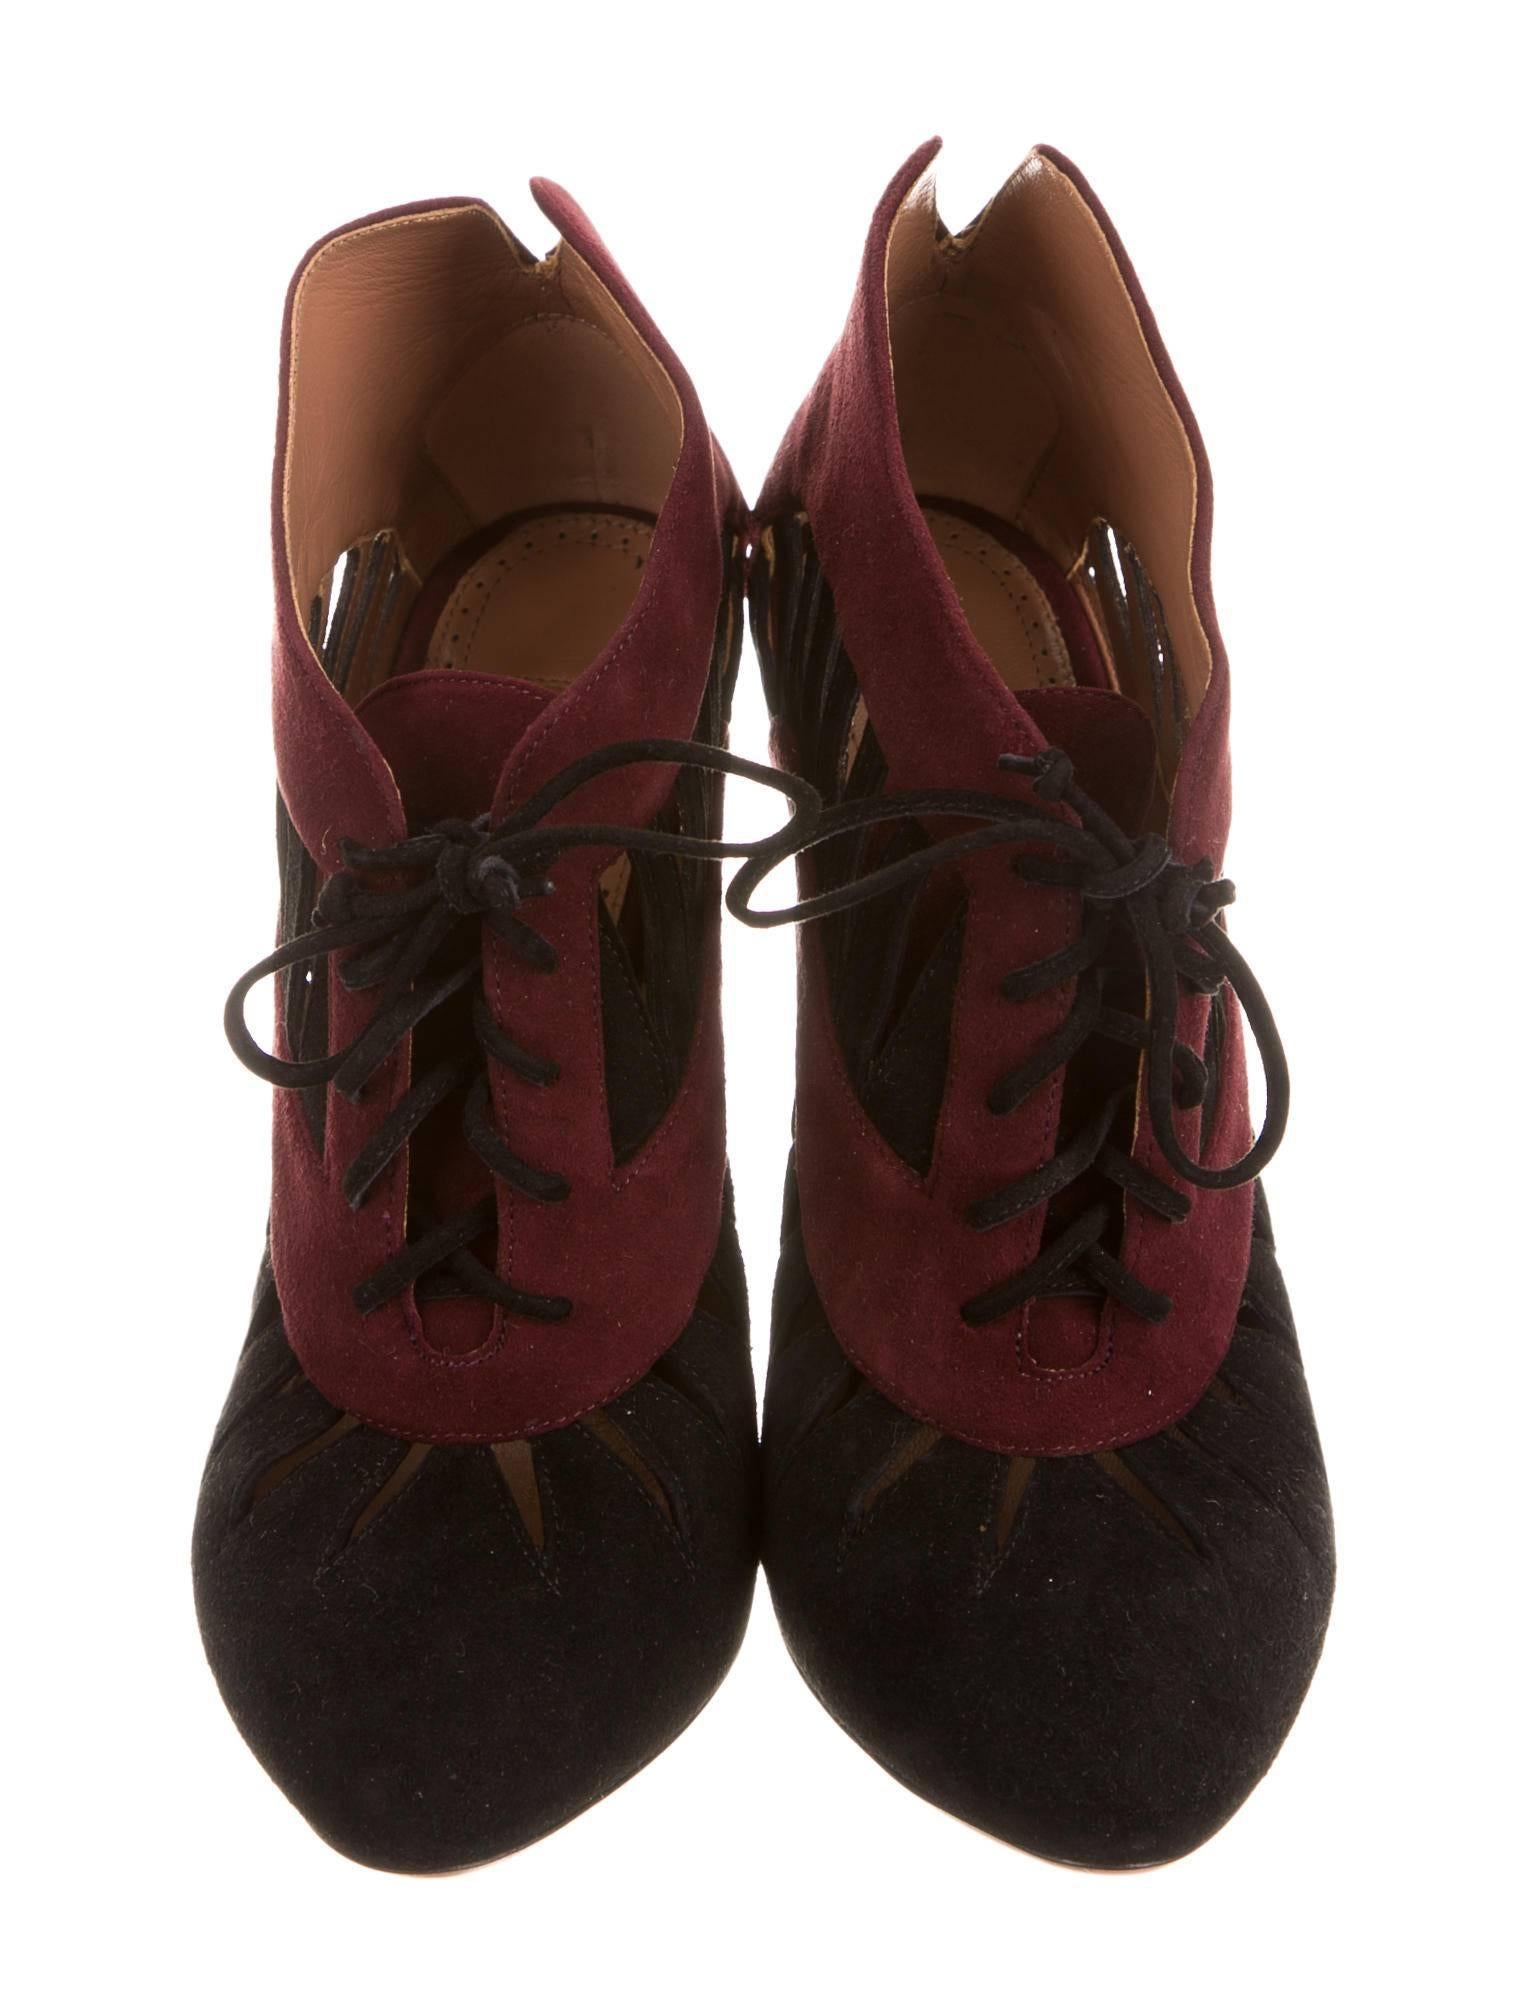 Women's Alaia NEW & SOLD OUT Burgundy Black SuedeCut Out Lace Up Ankle Booties in Box 